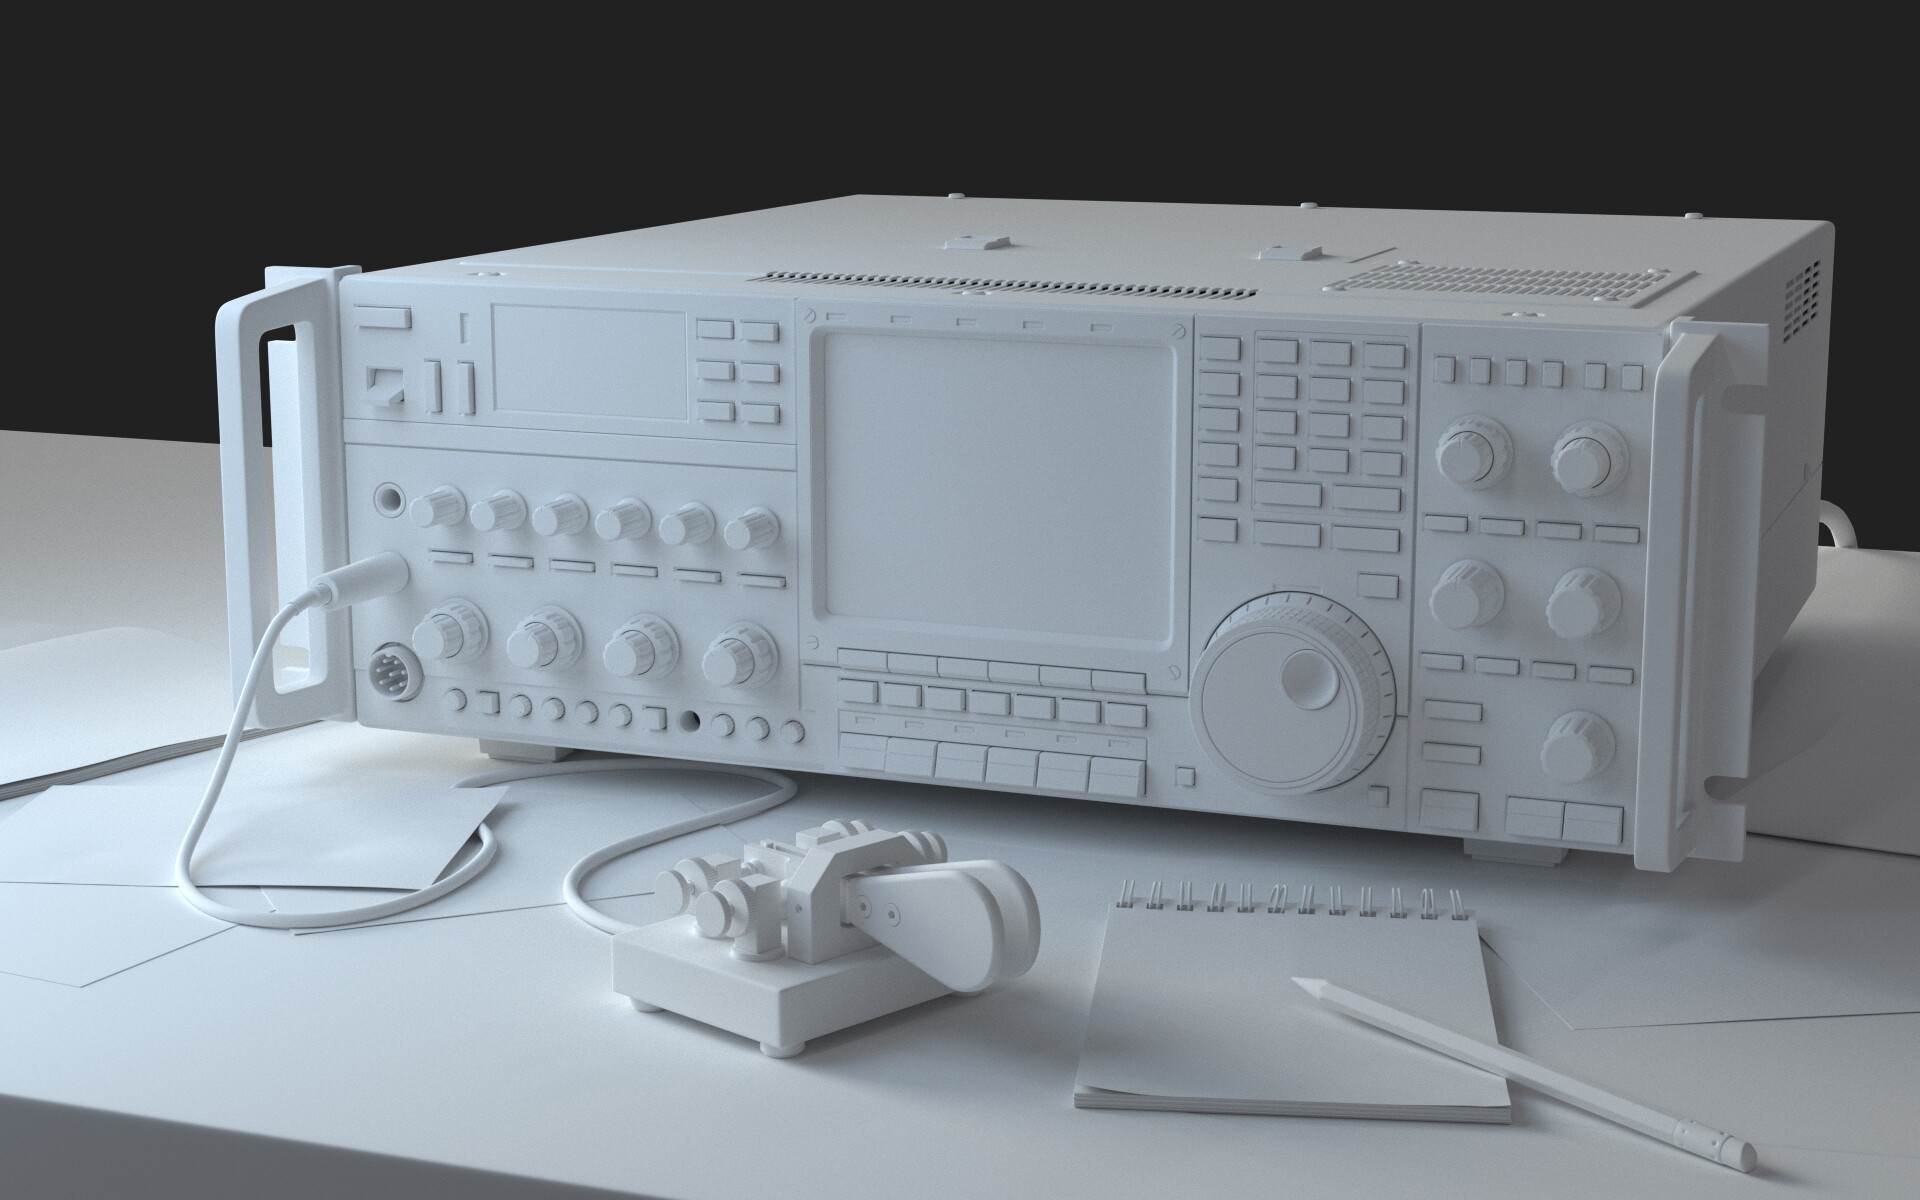 ArtStation - To see and hear. Tribute to ICOM IC-780.